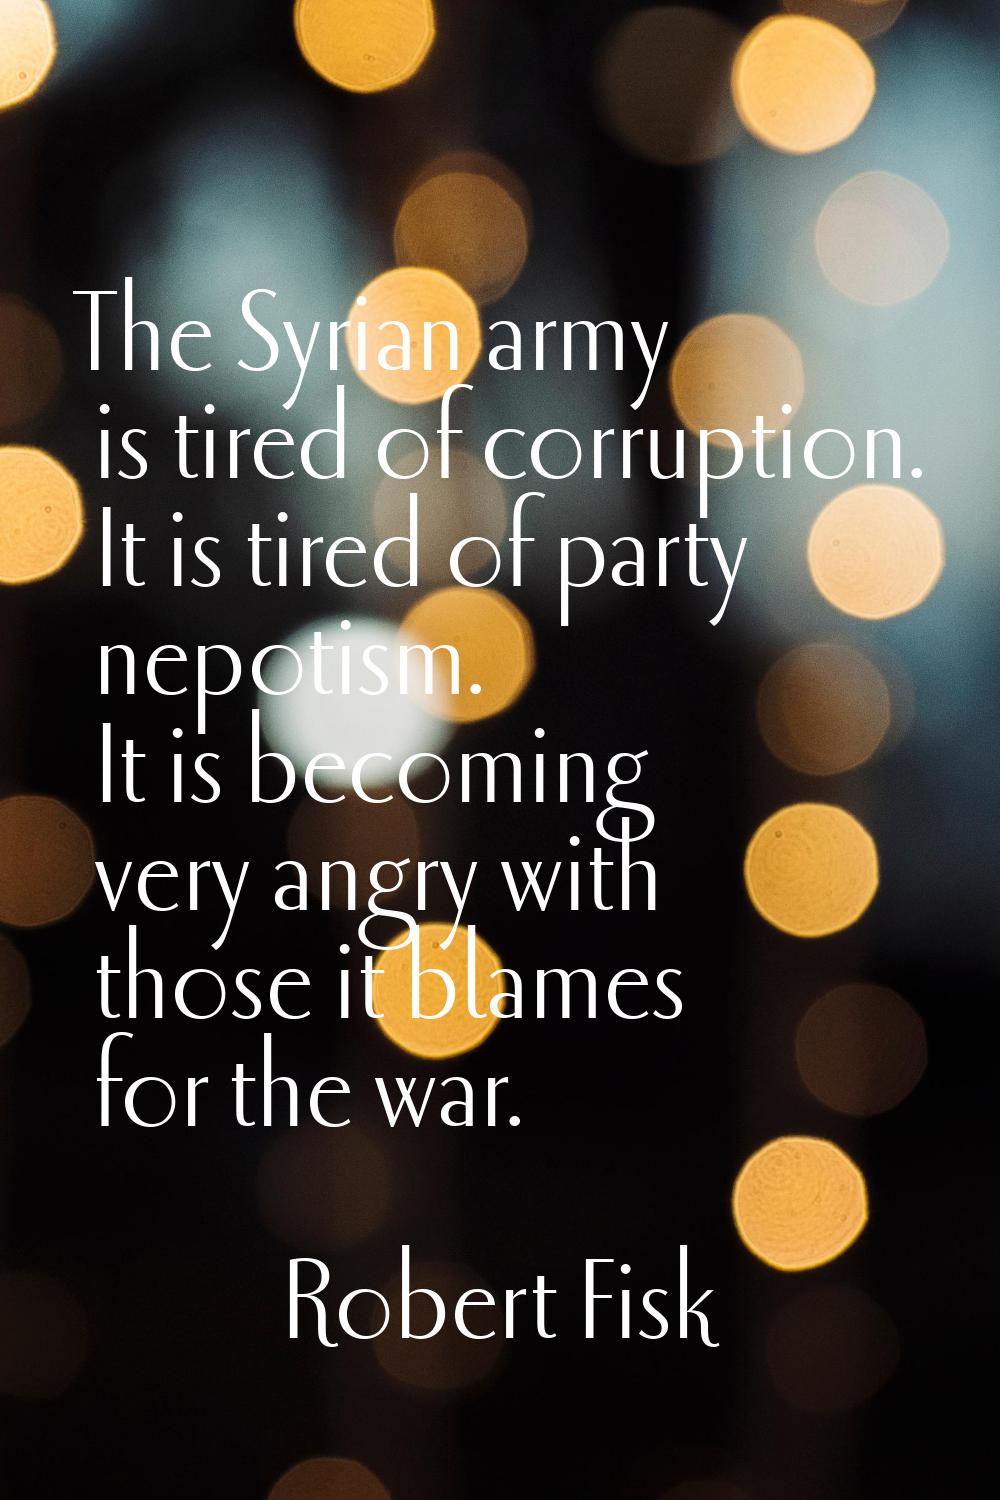 The Syrian army is tired of corruption. It is tired of party nepotism. It is becoming very angry wi